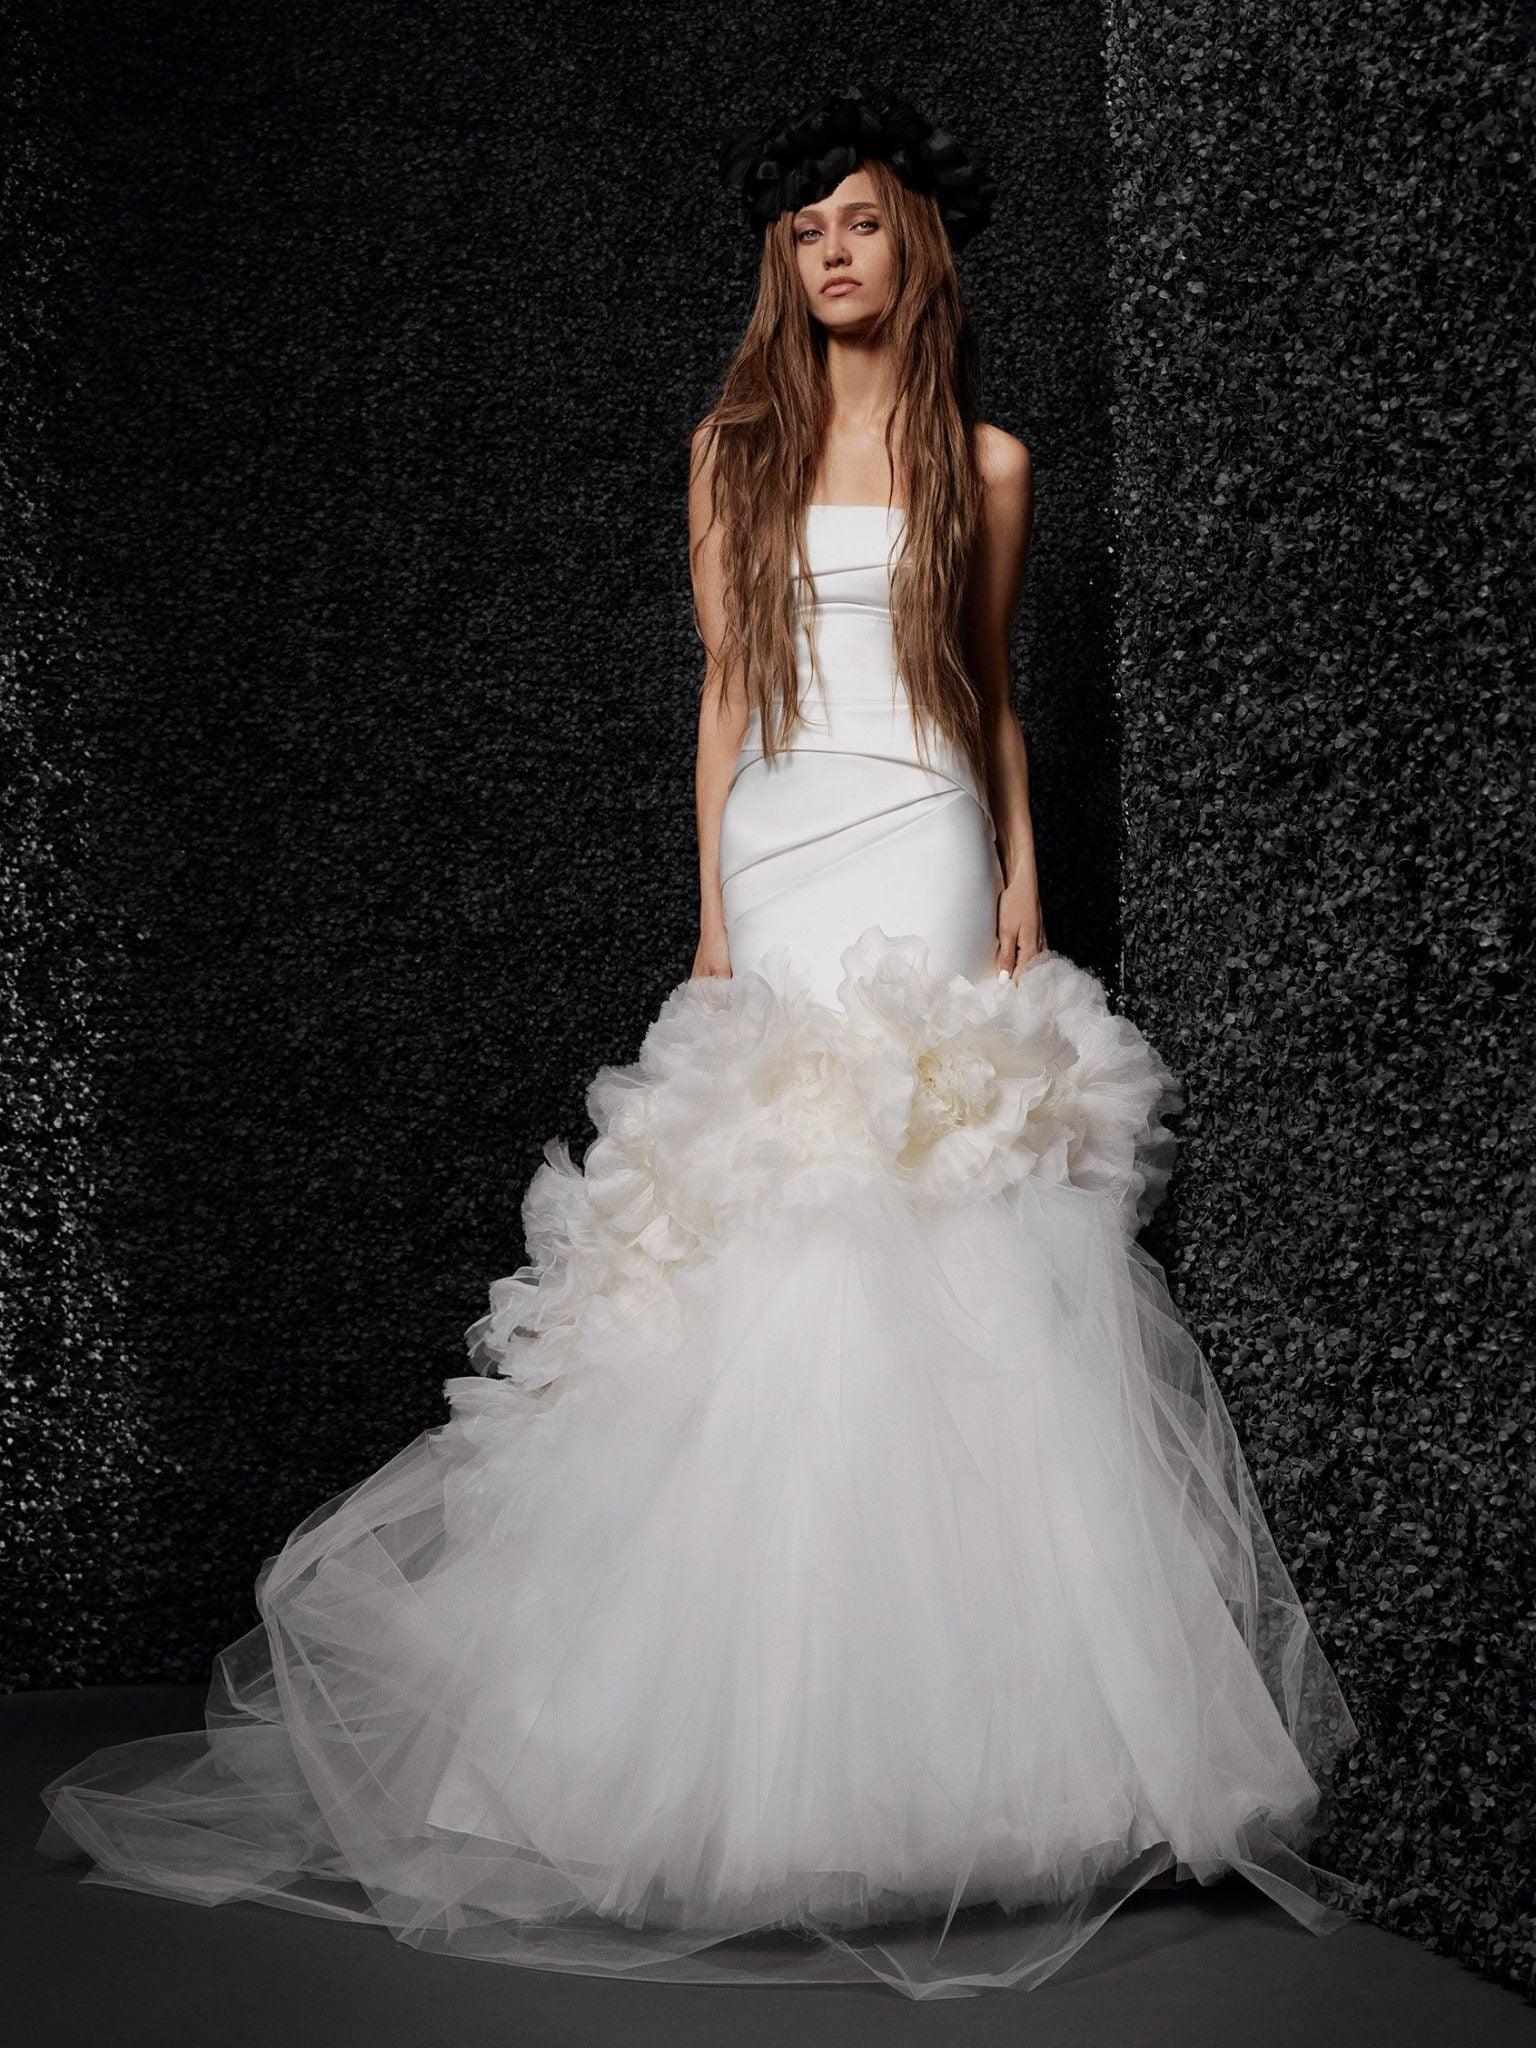 Vera Wang Bride - White Lily Couture